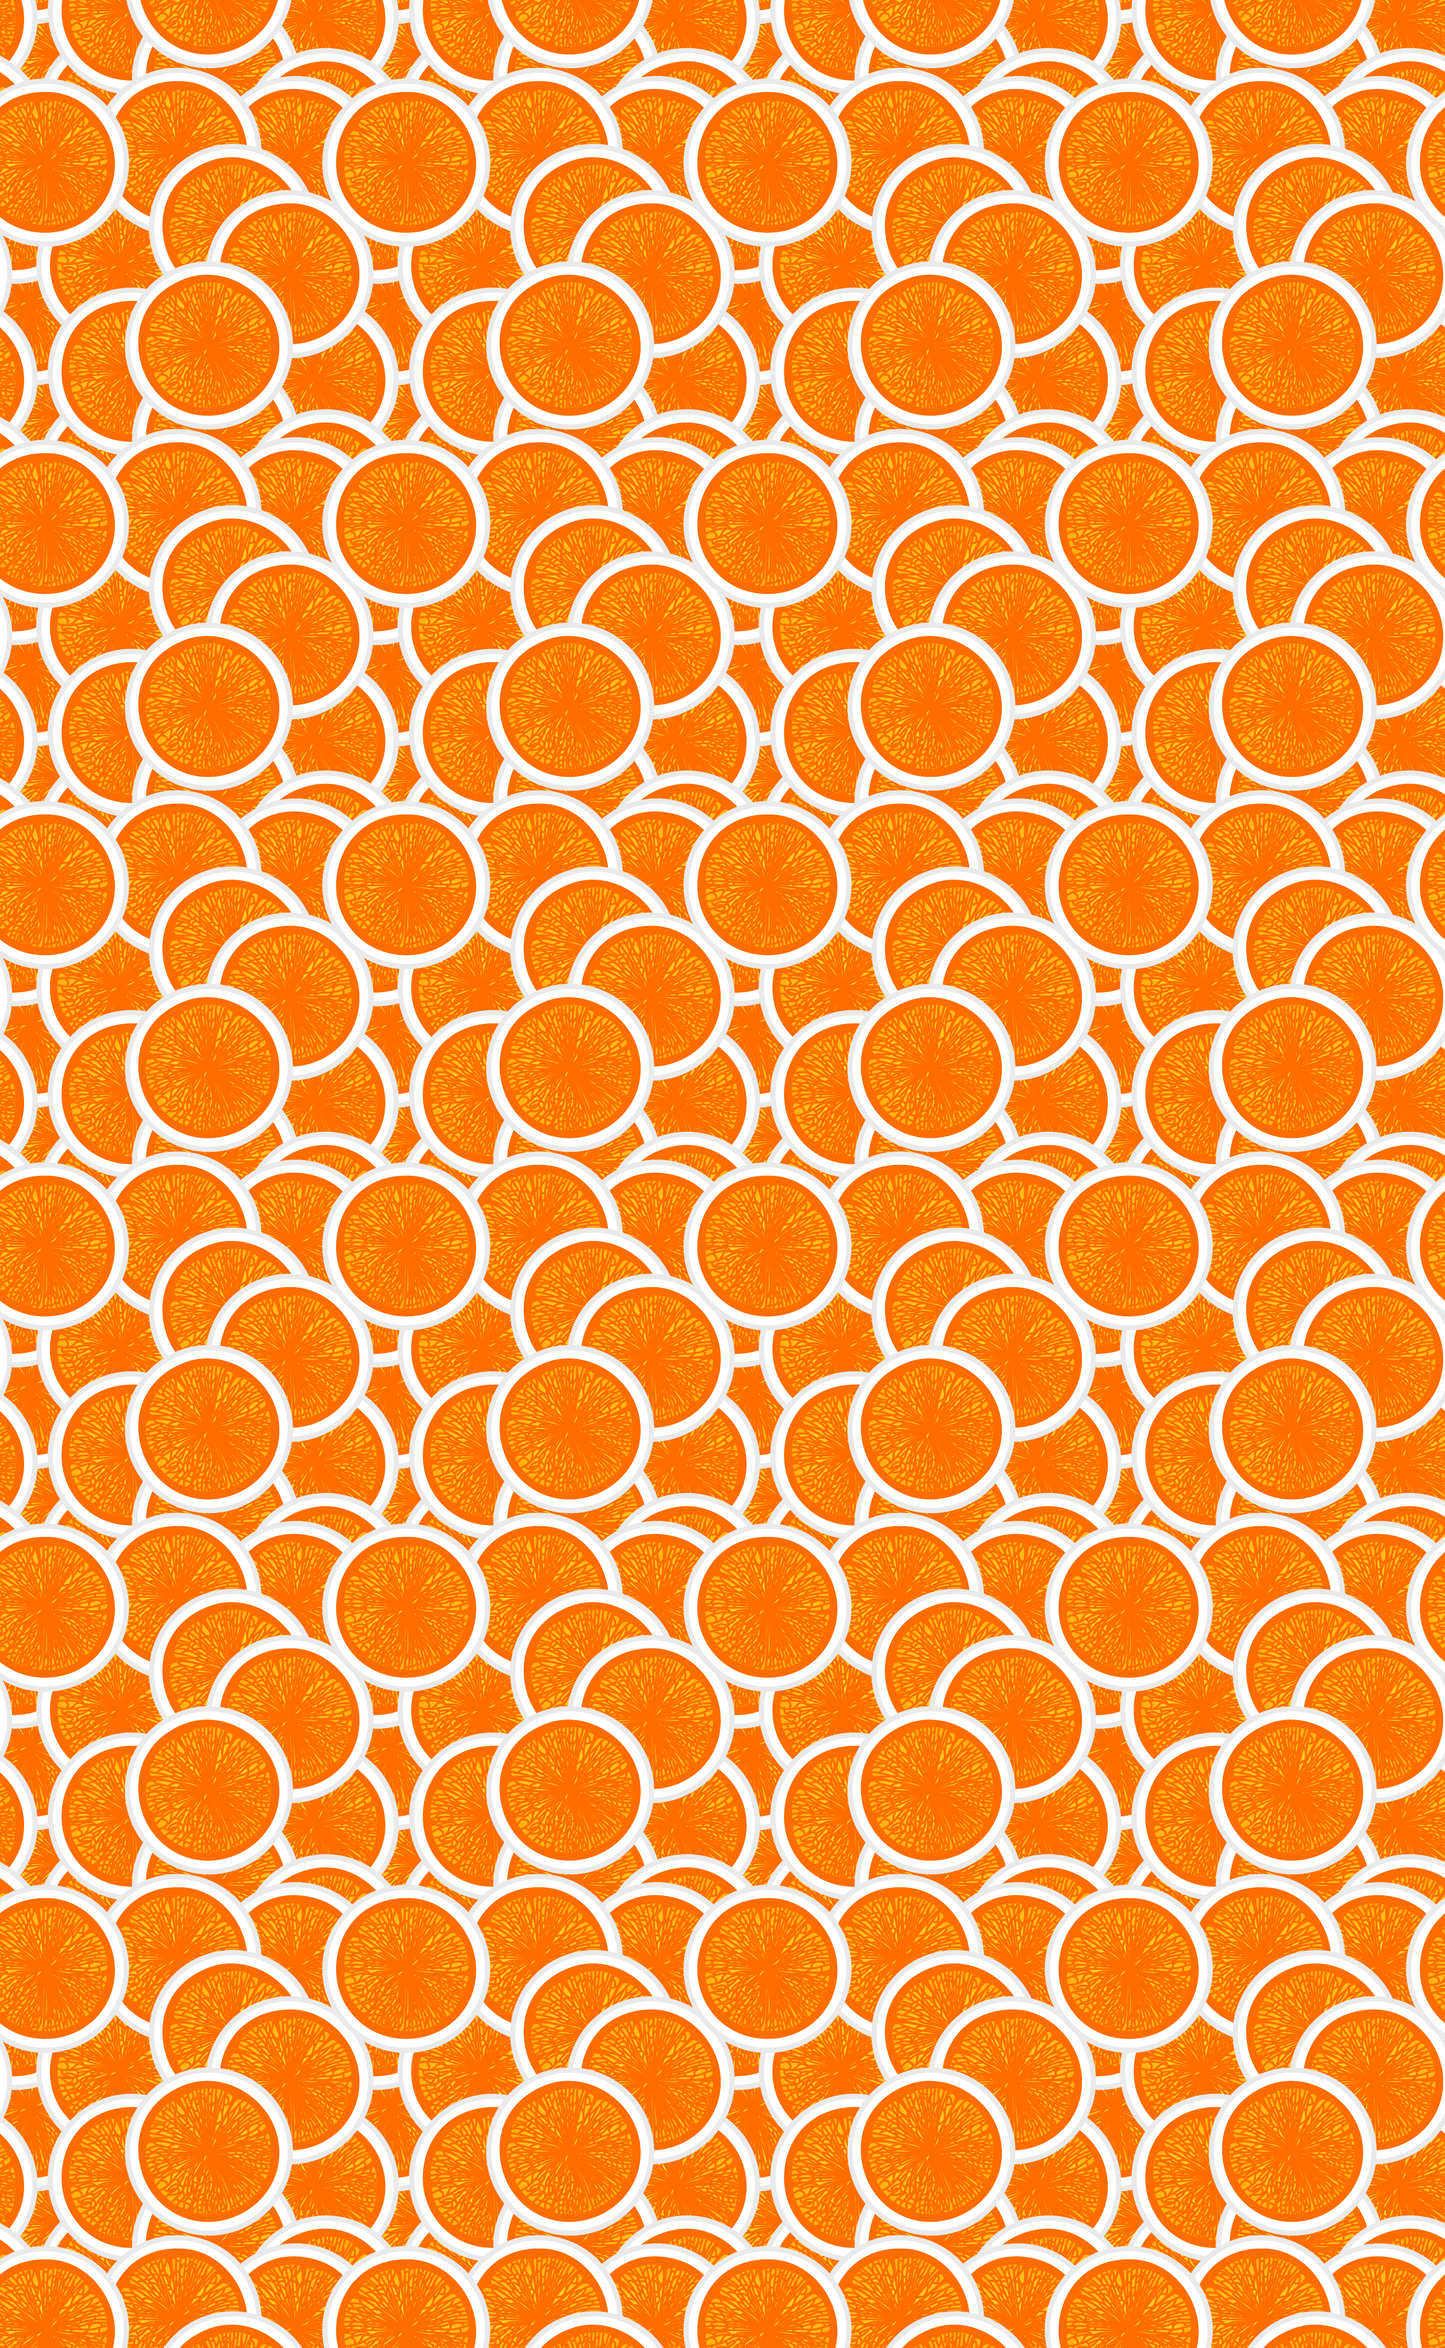 Sliced Oranges (8x13" Faux Leather)